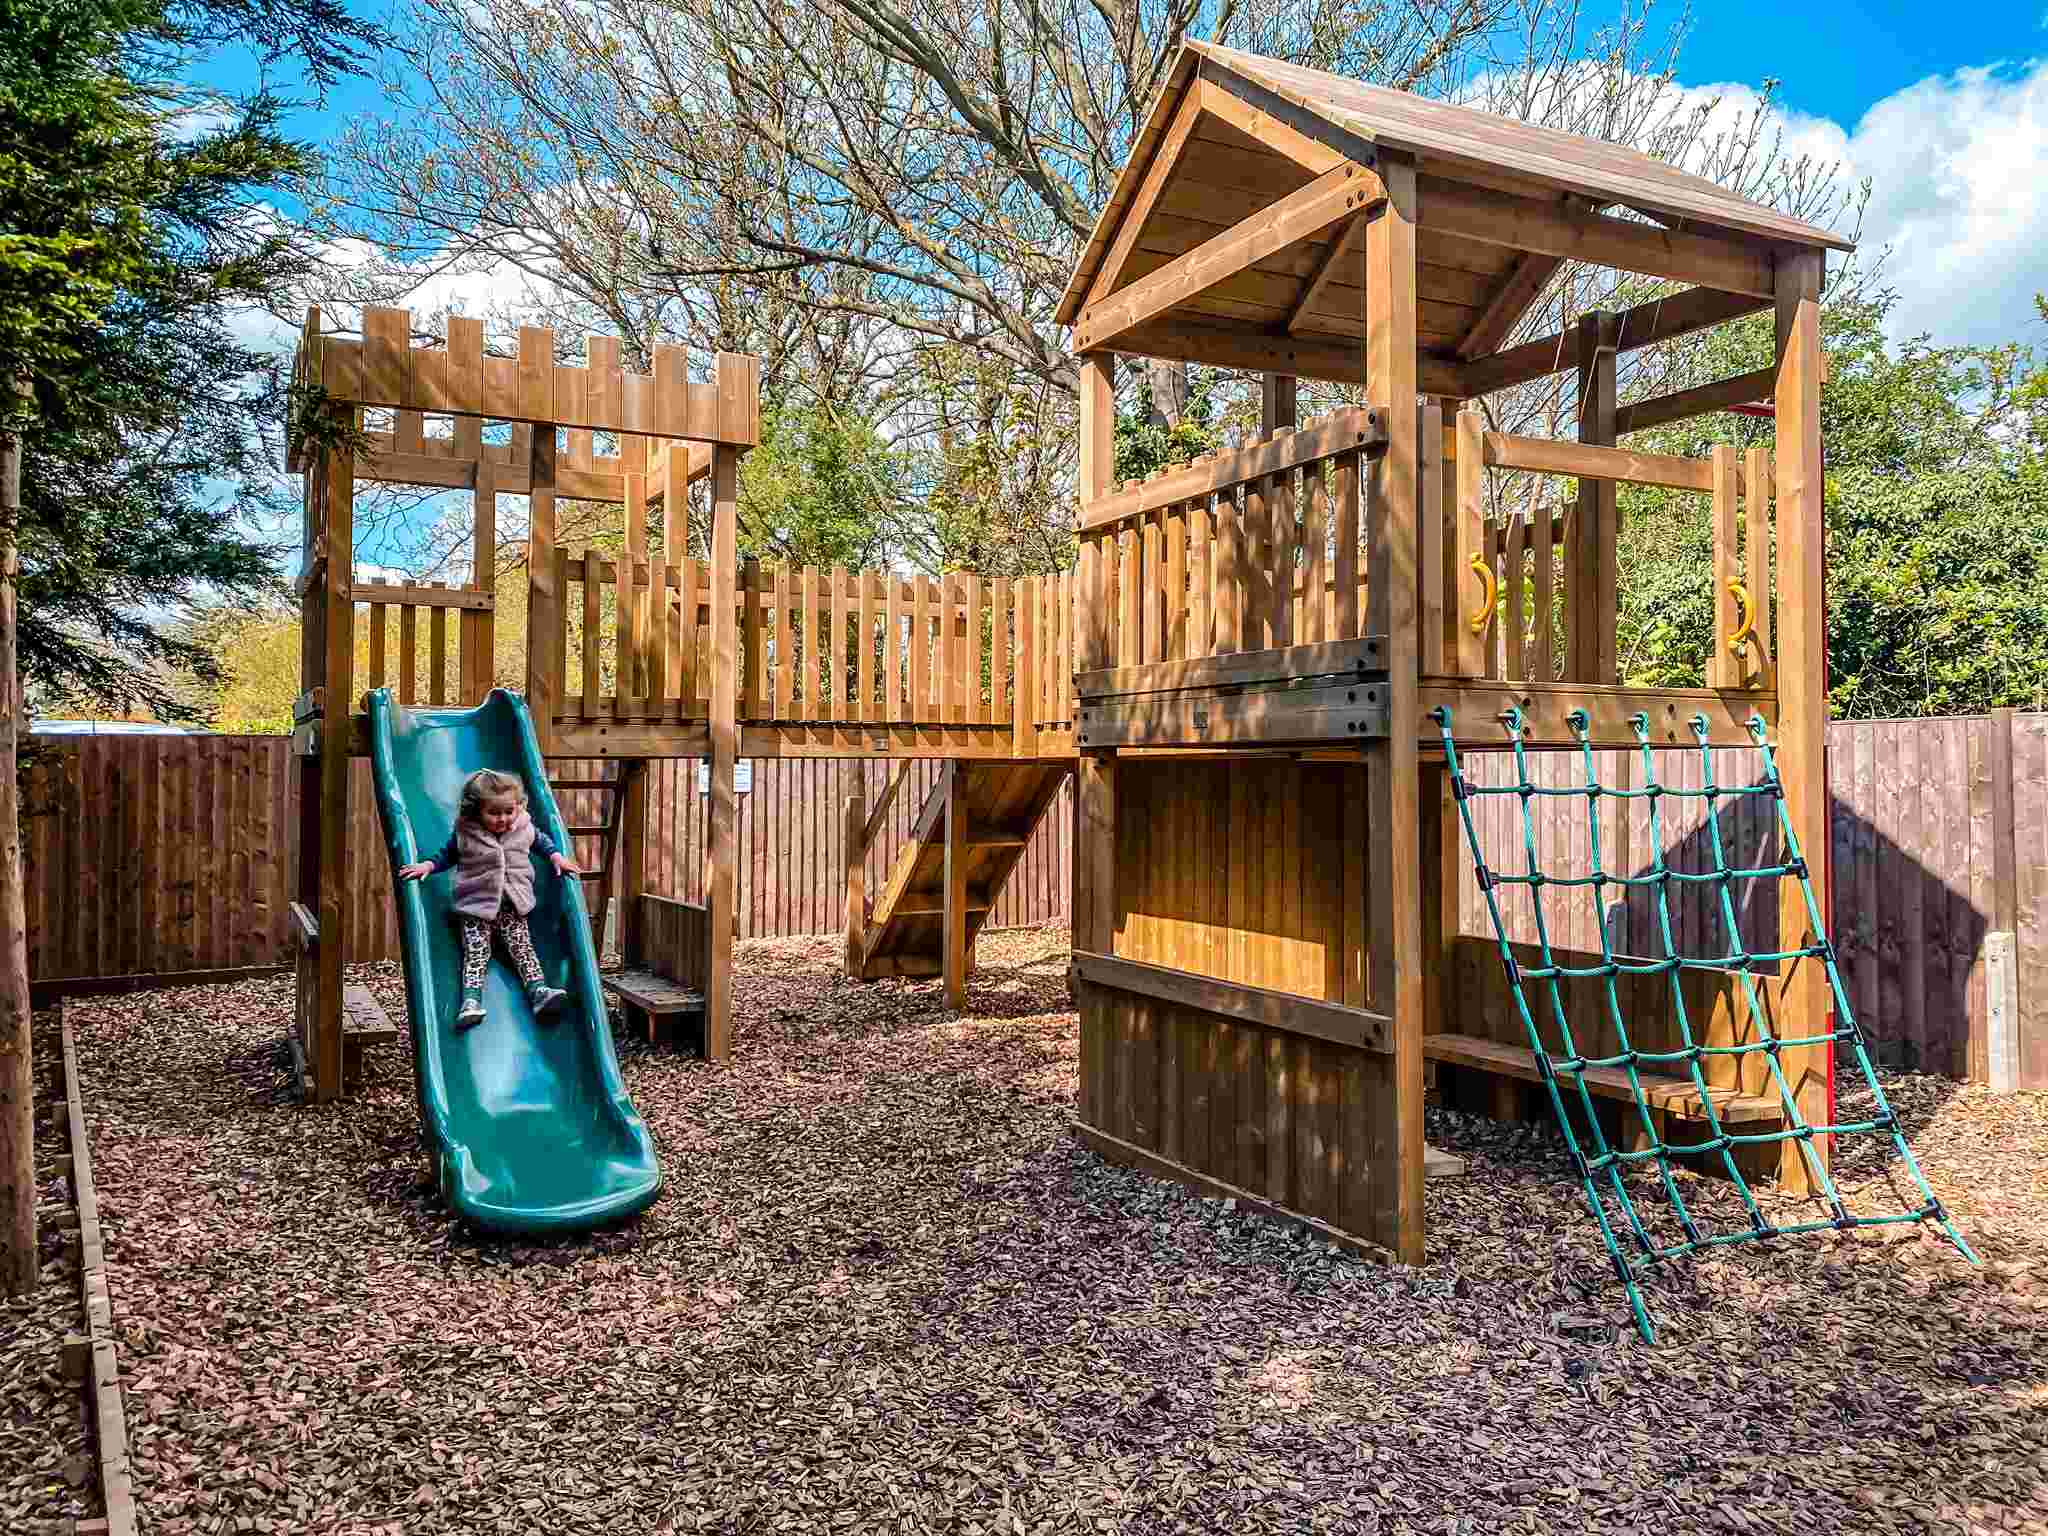 How To Make A Play Area In The Backyard